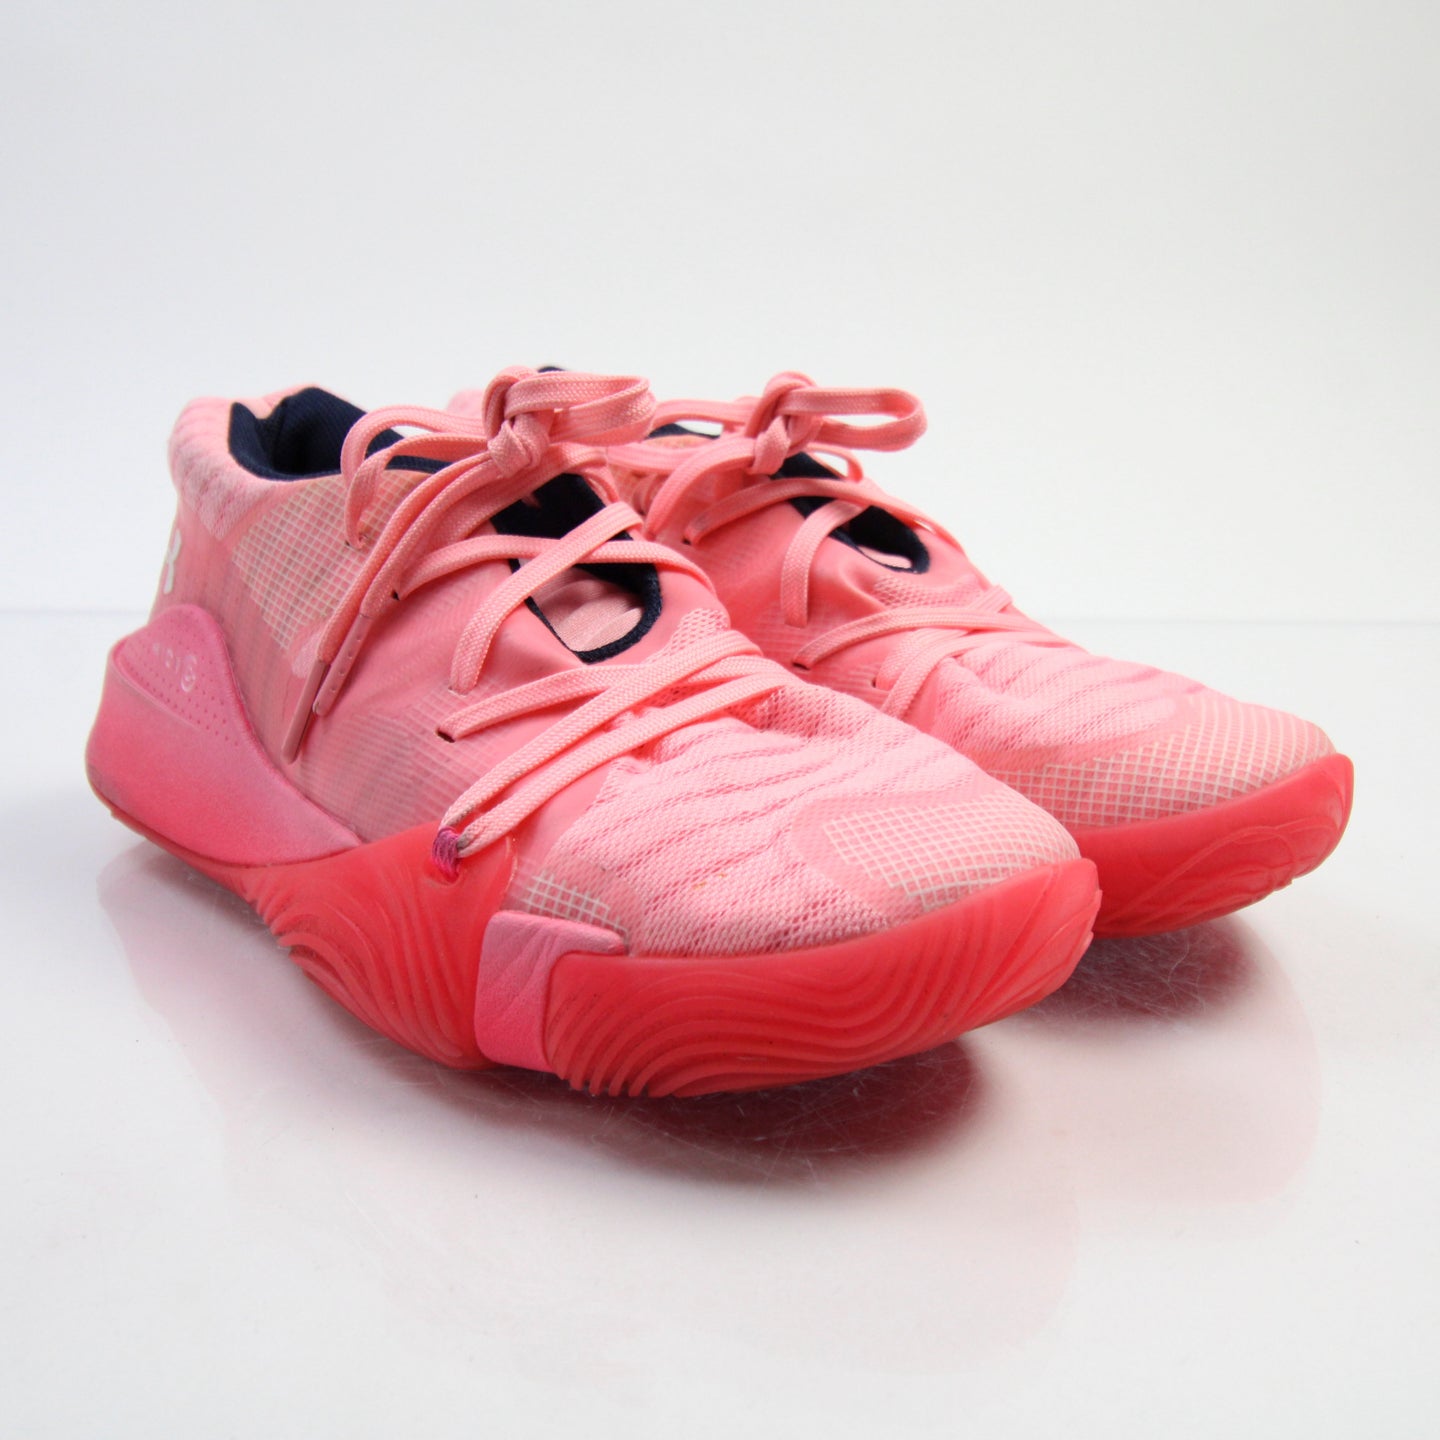 Under Armour Basketball Shoe Men's Pink SidelineSwap